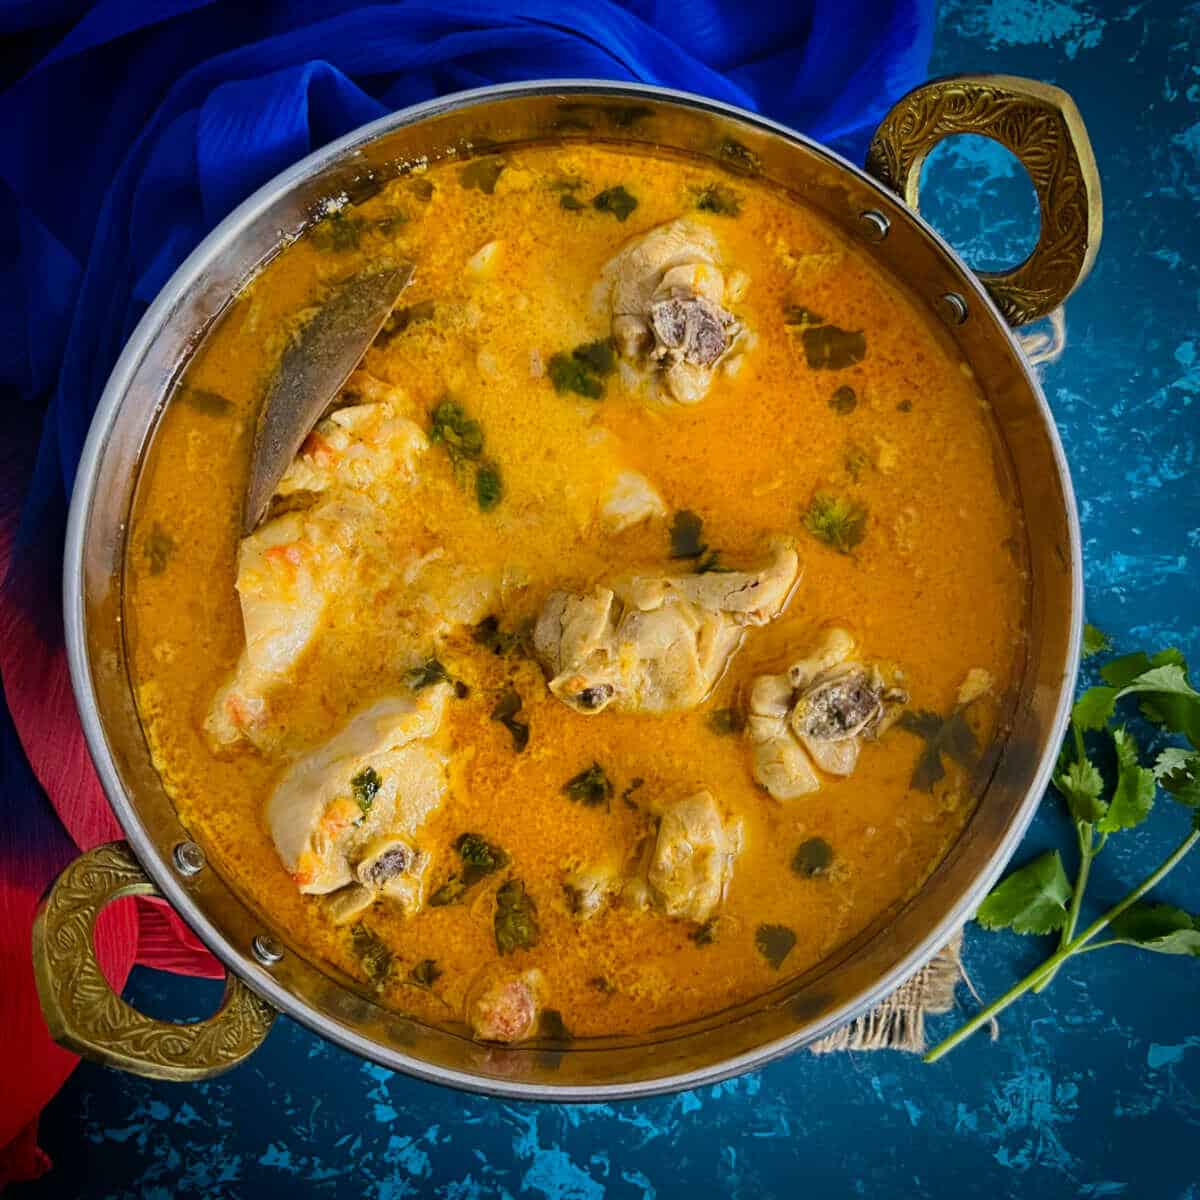 Balti chicken placed in a traditional balti bowl.